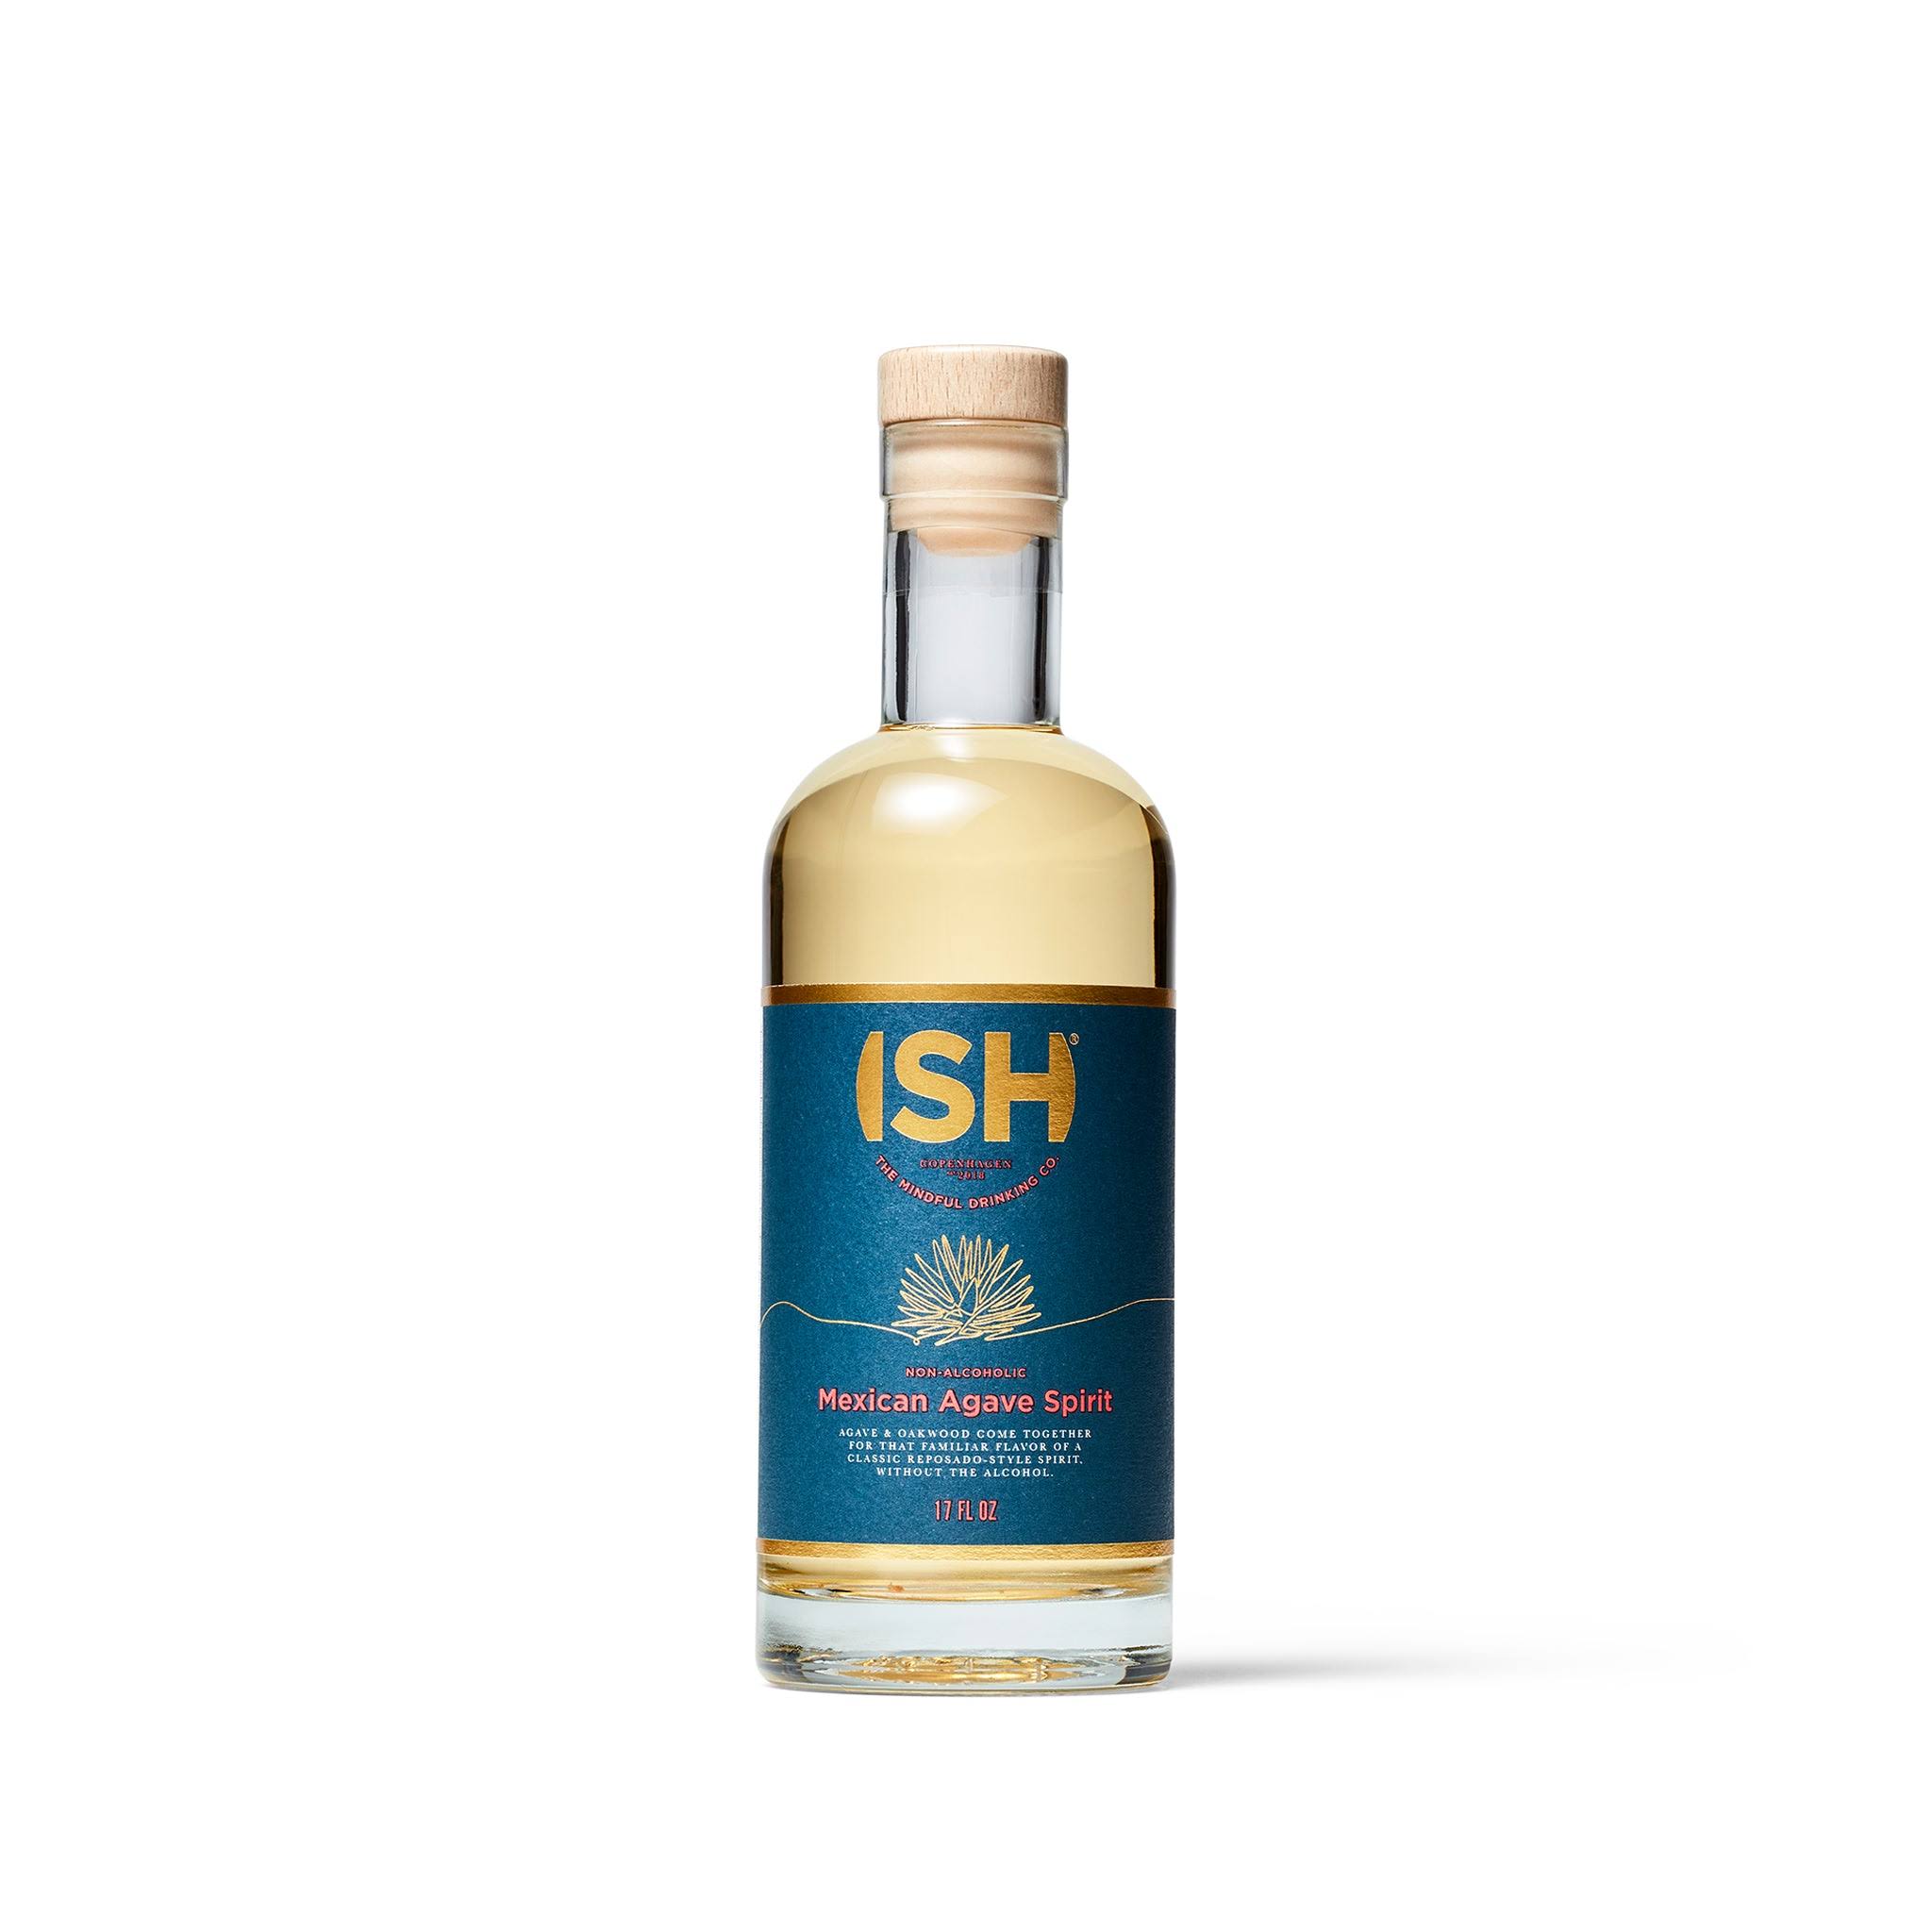 Ish - Mexican Agave Spirit - Non-Alcoholic - 500 ml